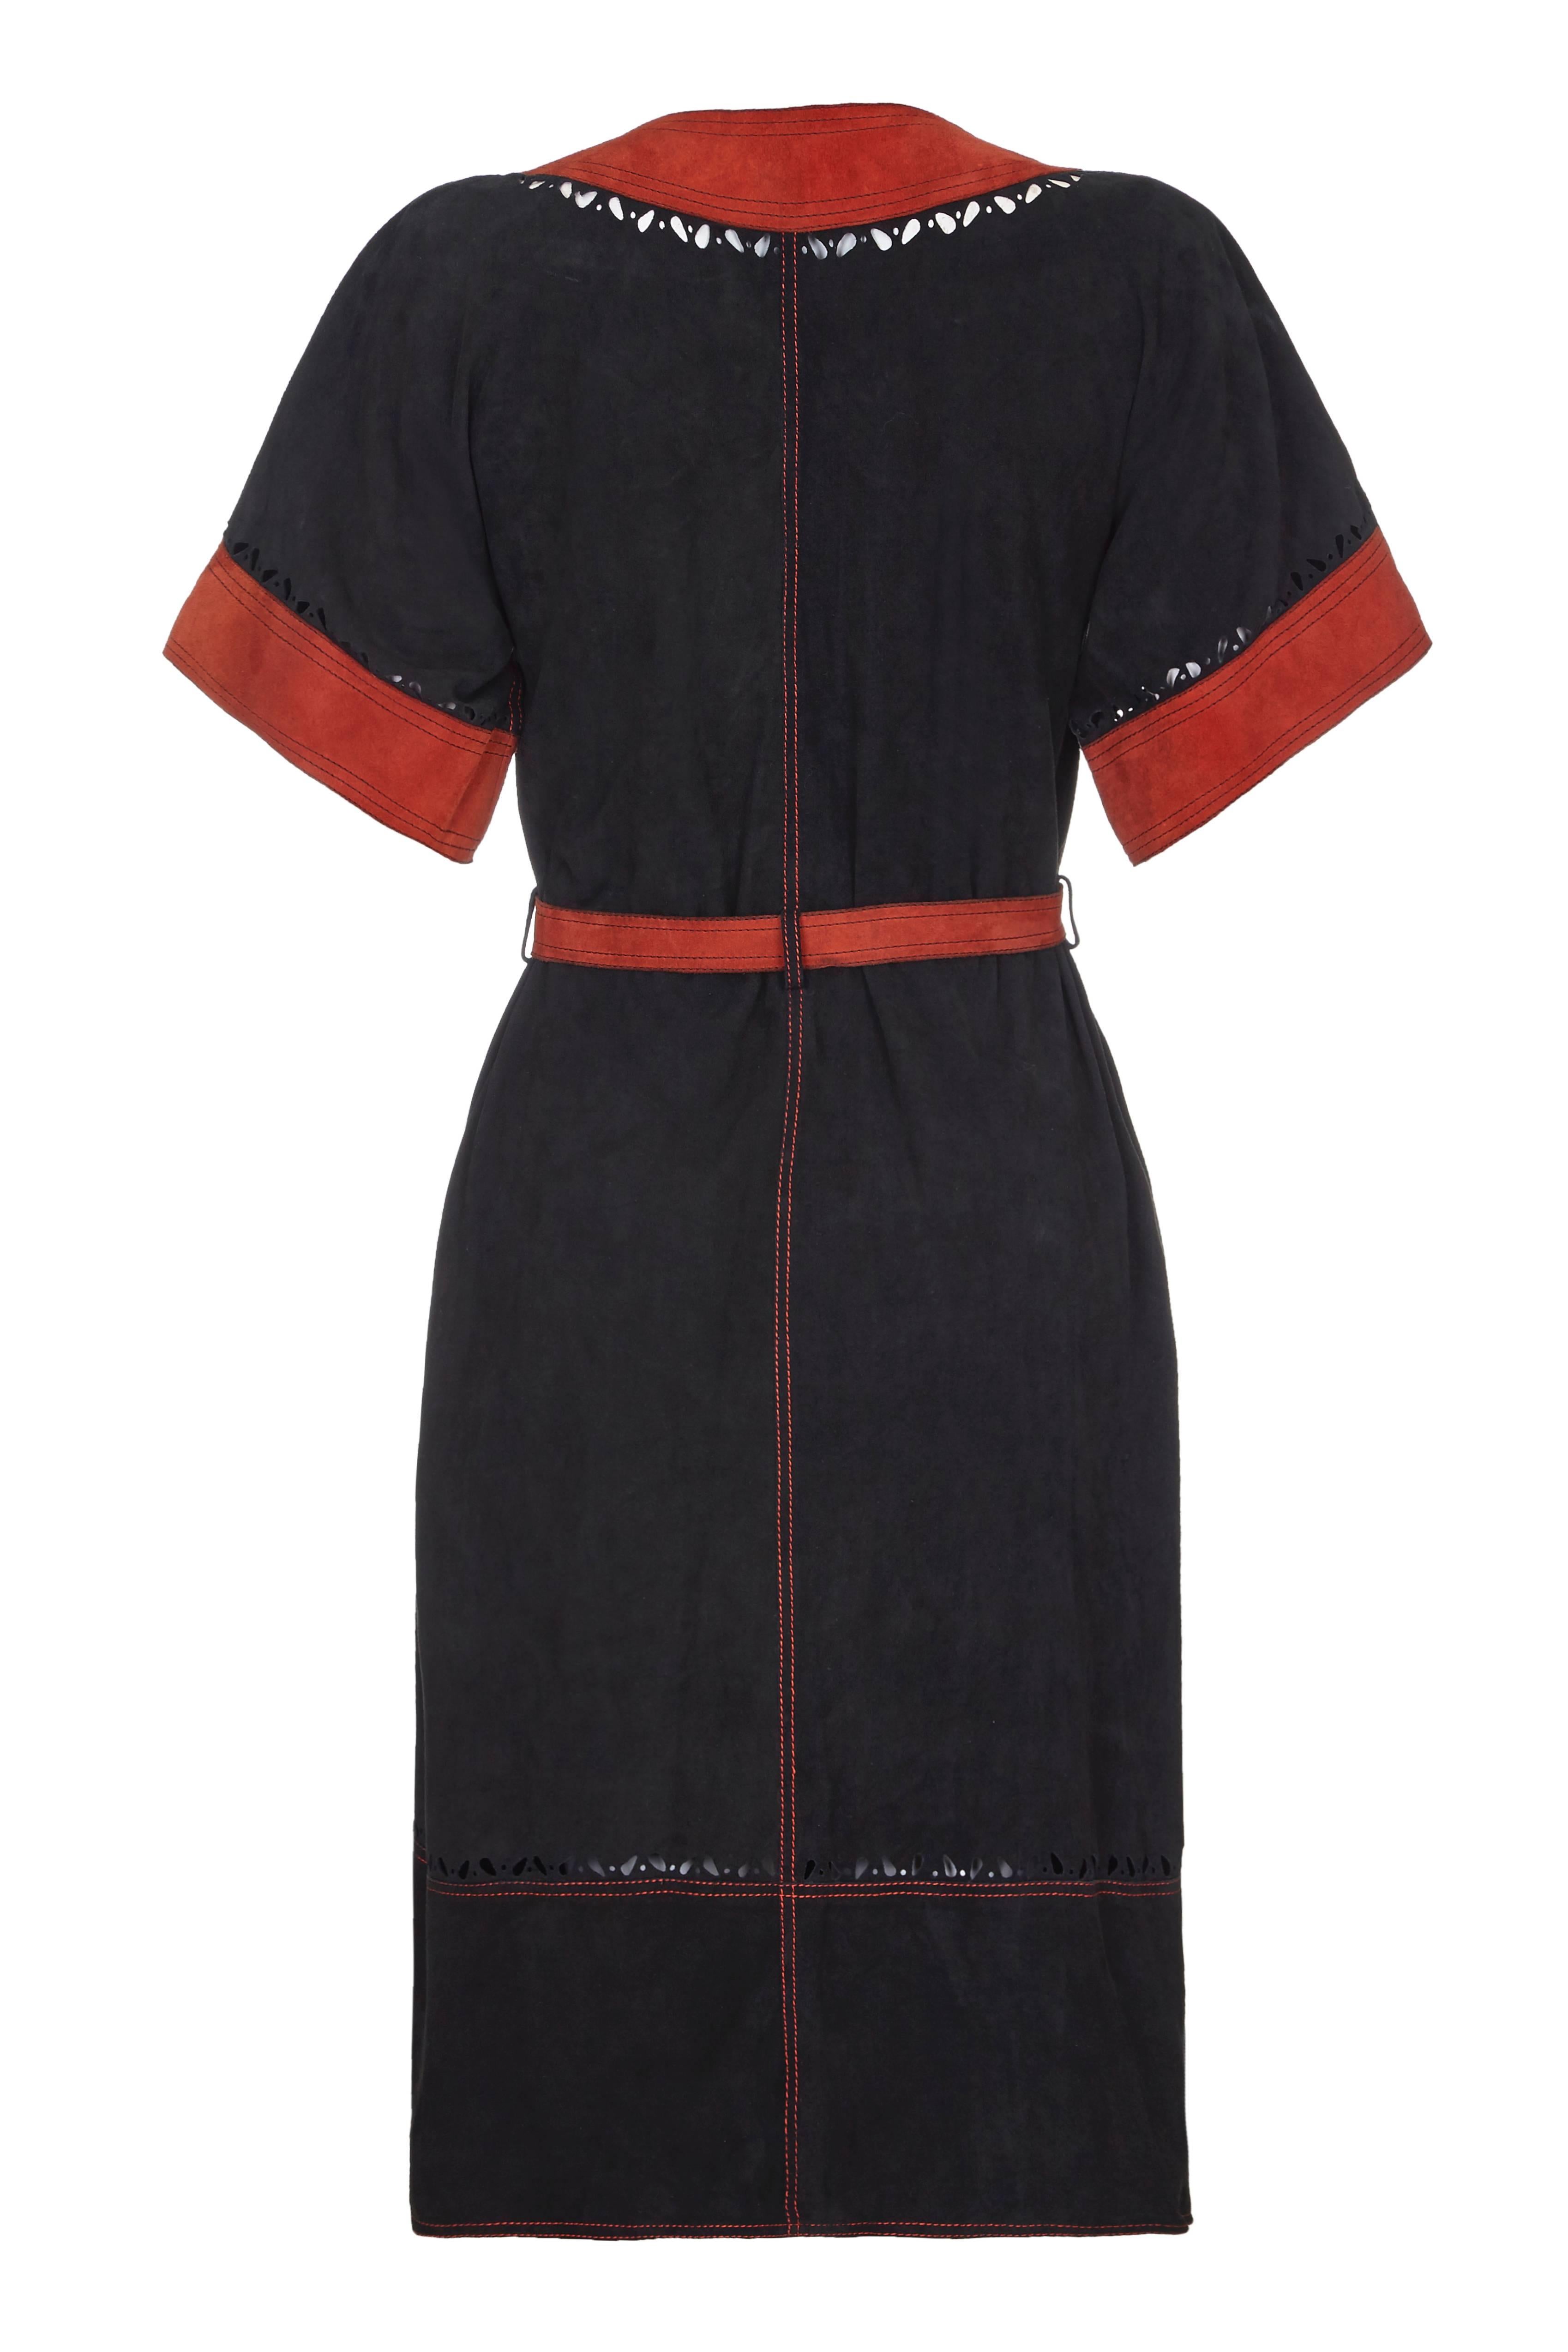 Amazing vintage 1970s Jean Muir black suede dress with terracotta suede details including belt, edging and applique leaves.  This fantastic winter piece fastens at the front with buttons and also features small cut out details and top-stitching. 